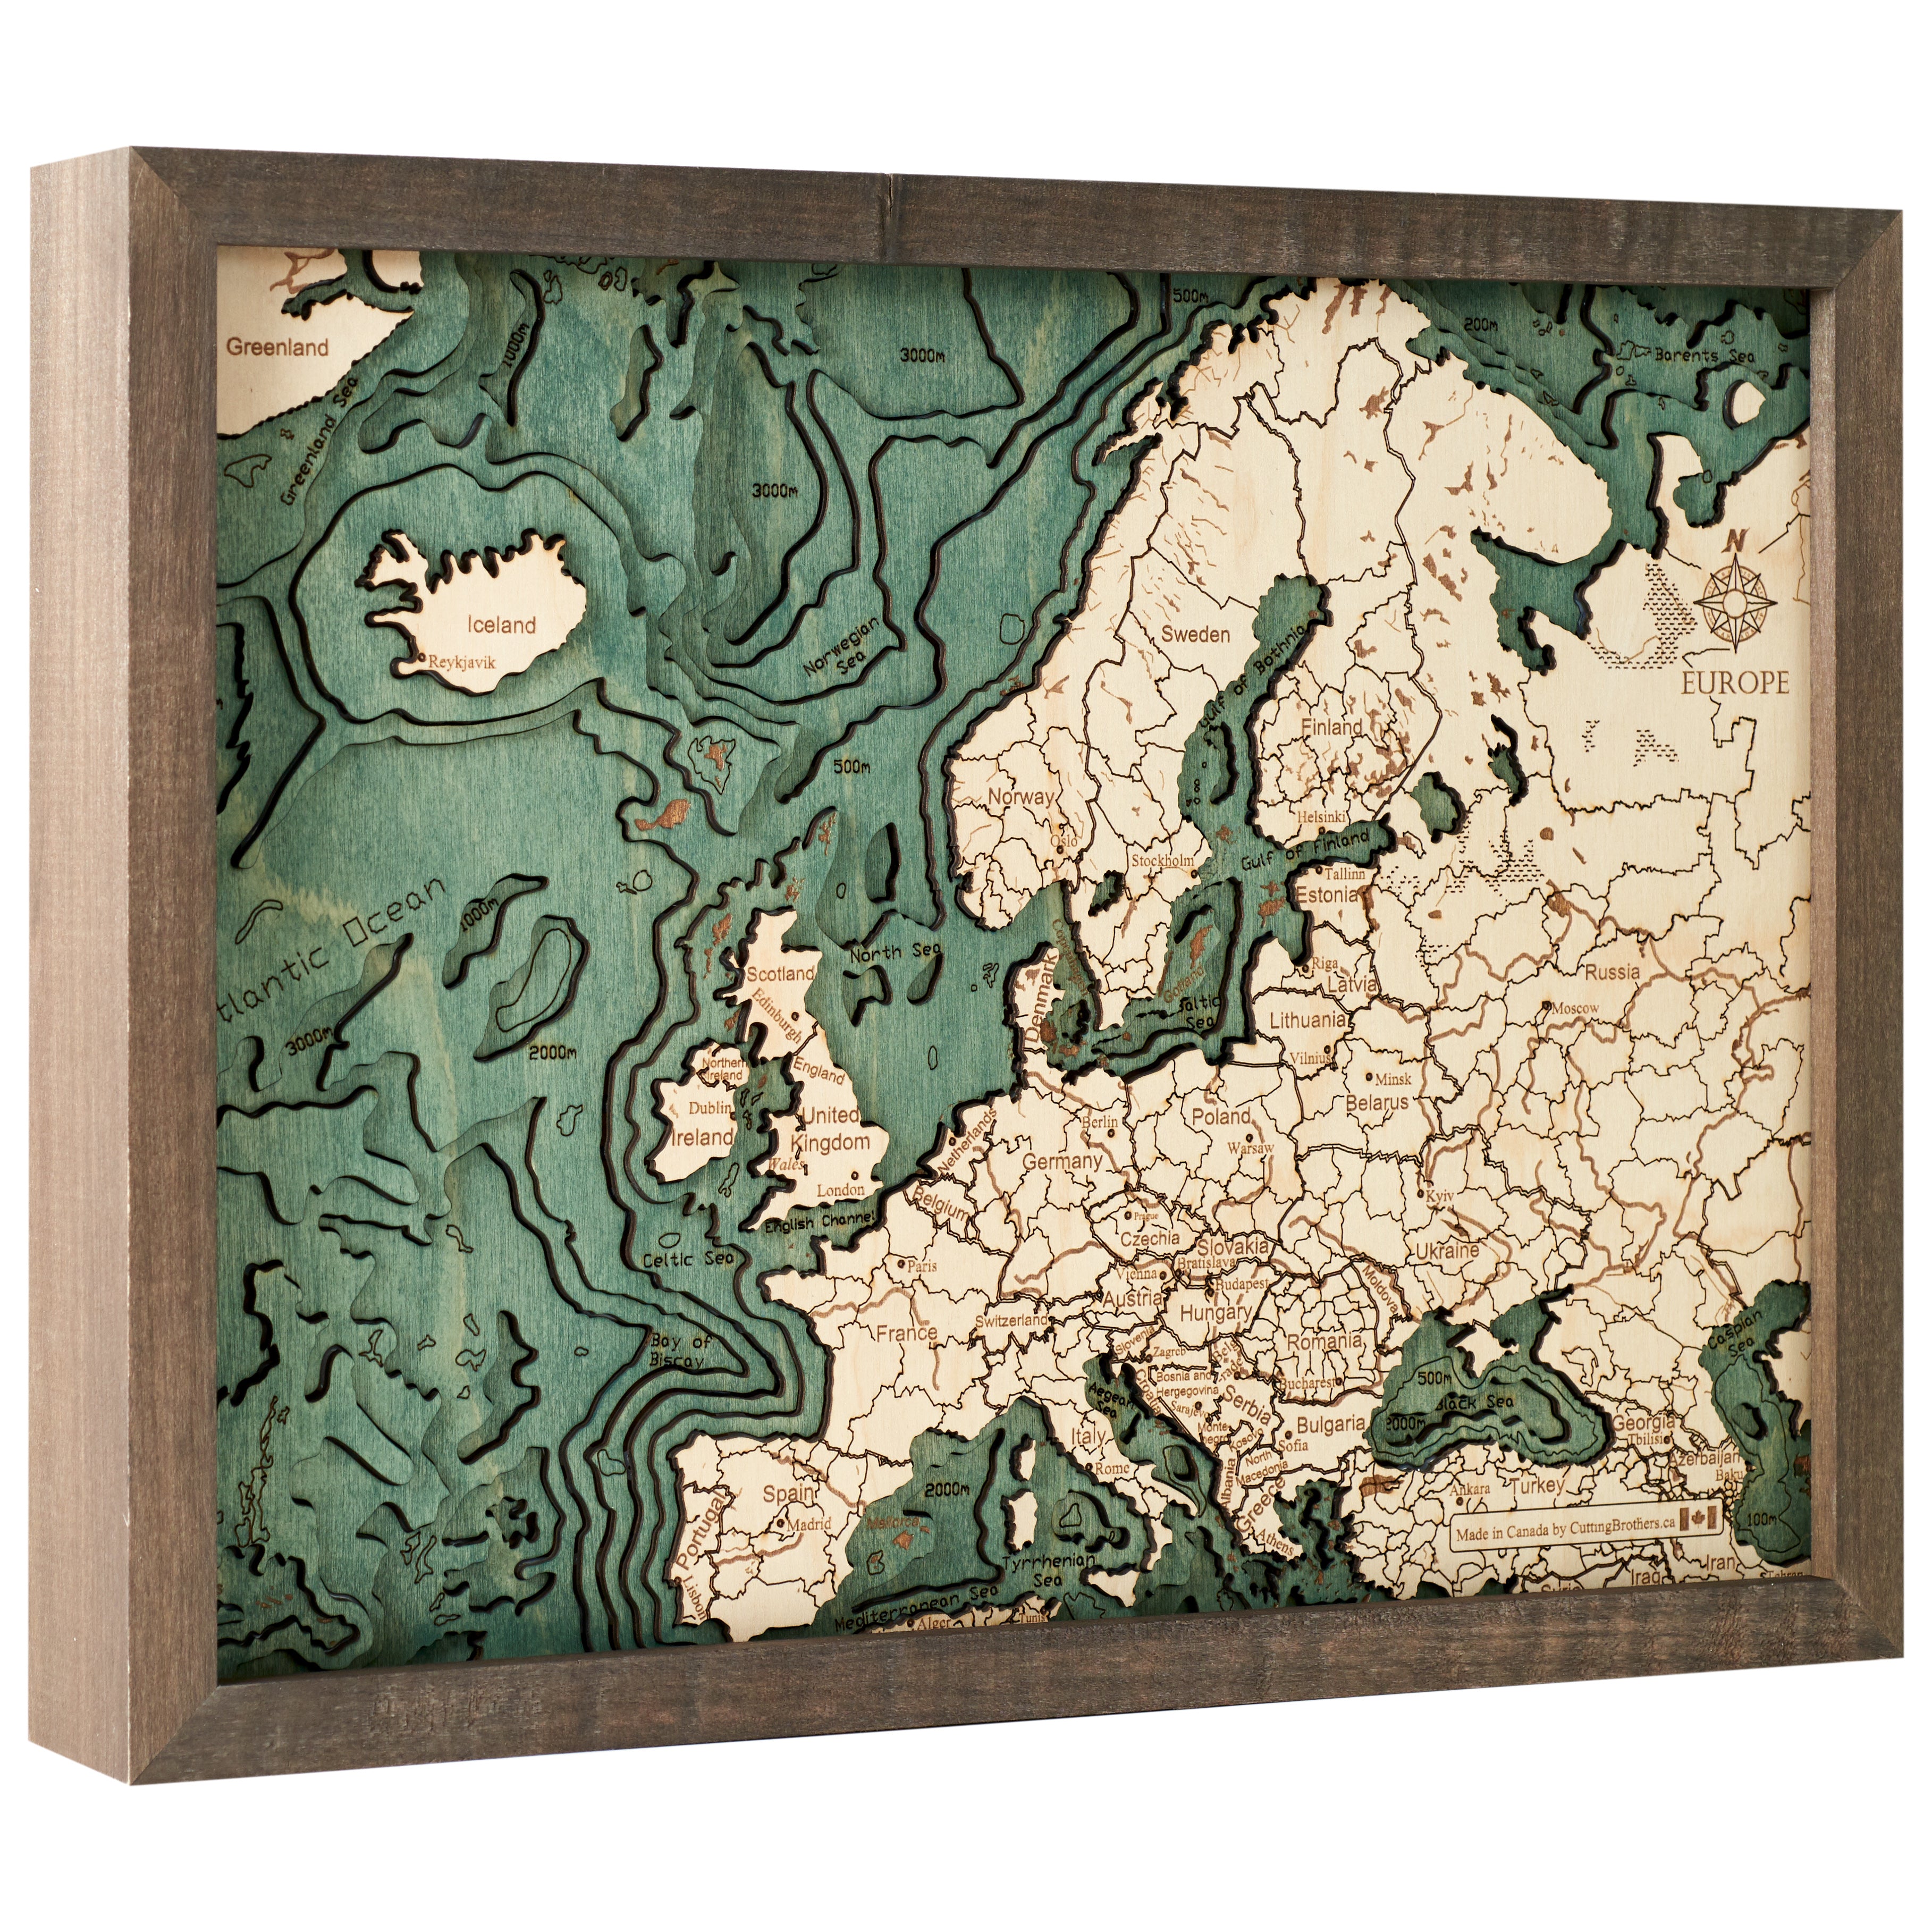 EUROPE 3D WOODEN WALL MAP - Version S